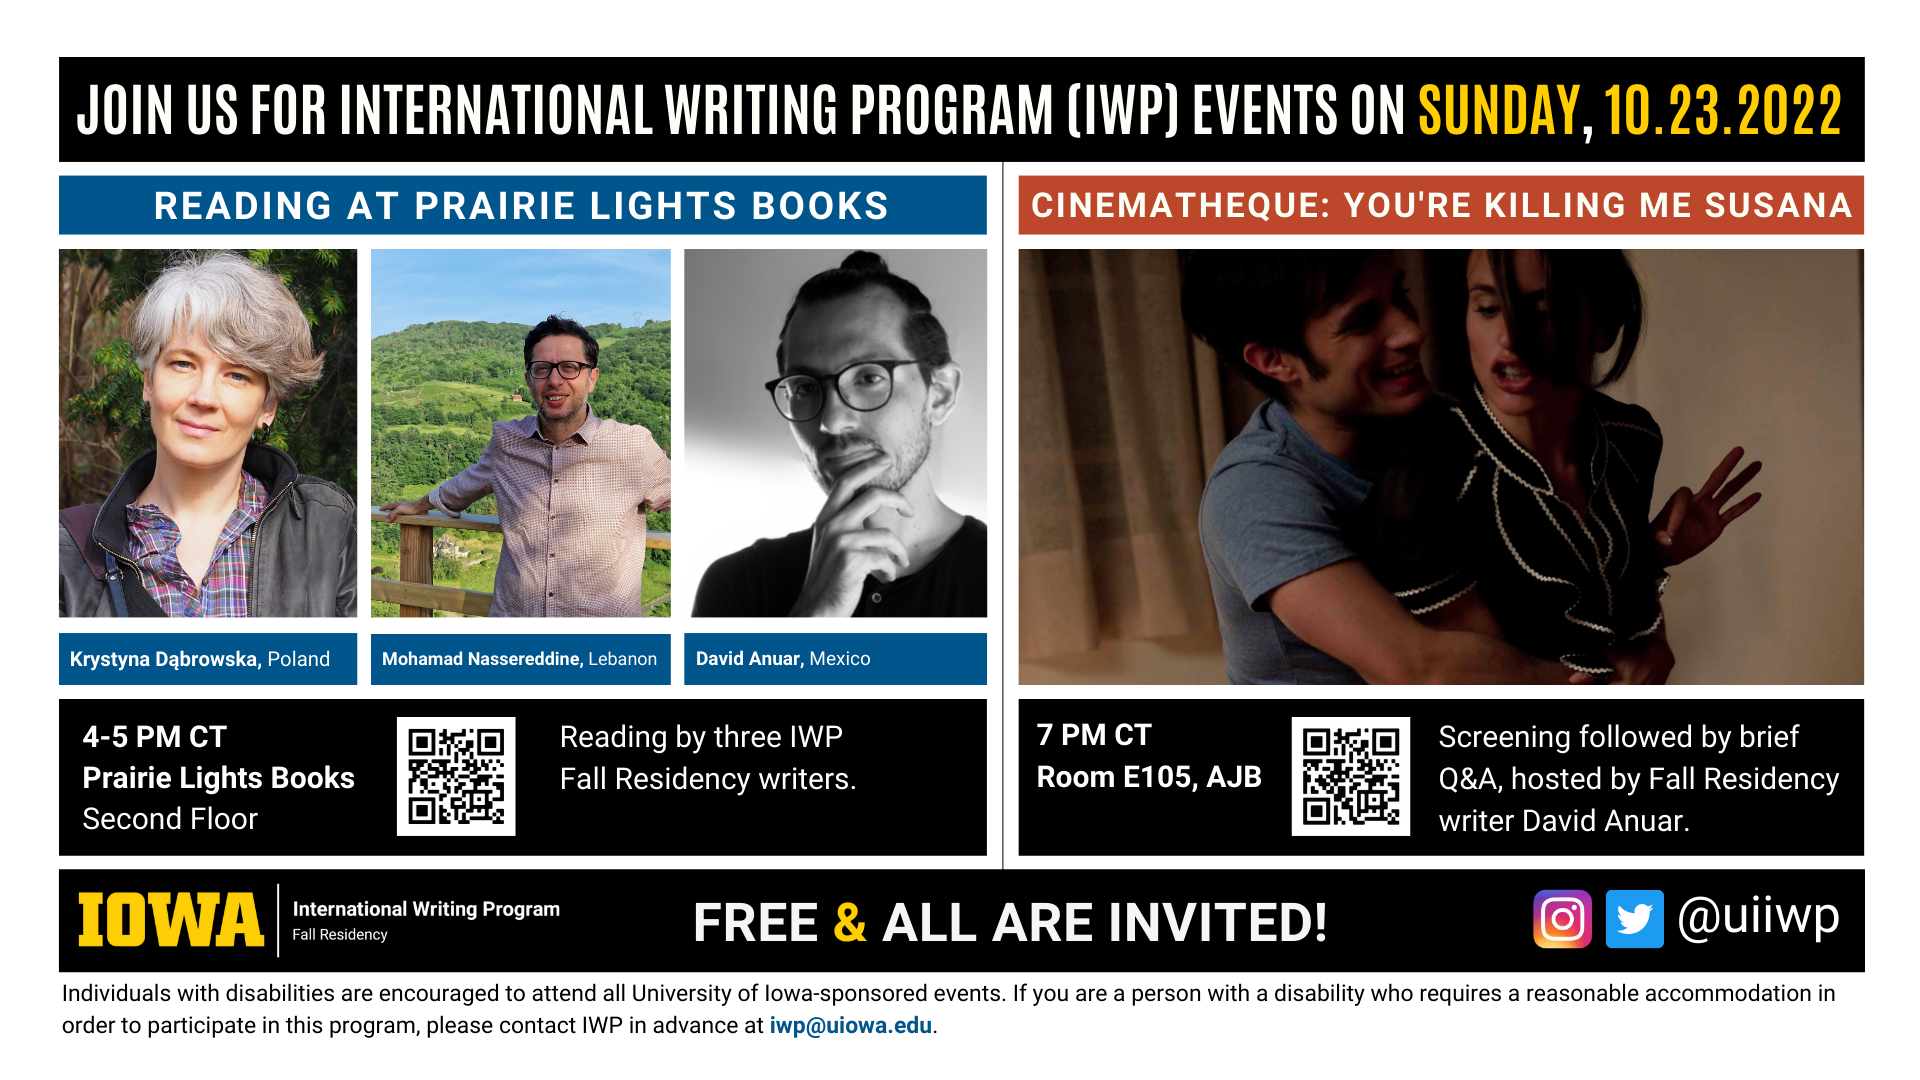 Sunday, 10/23 Image: An image with two halves, each advertising one event. The image as a whole is labeled "Join us for International Writing Program (IWP) Events on Sunday, 10.23.2022. The left half left of the image is labeled "Reading at Prairie Lights Books." There are portraits of three writers (named below) and the following text: "Krystyna Dąbrowska, Poland. Mohamad Nassereddine, Lebanon. David Anuar, Mexico." 4-5 PM CT Prairie Lights Books, Second Floor. Reading by three IWP Fall Residency writers." The right half of the image is labeled "Cinematheque: You're Killing Me Susana. Below that heading there is a screenshot from the film, featuring a laughing man hugging a furious-looking woman from behind. The following text appears below: "7 PM CT, Room E105 AJB. Screening followed by brief Q&A, hosted by Fall Residency writer David Anuar." Below that text there are the IWP Fall Residency logo, the Instagram and Twitter handle @uiiwp, and a note that the event is “Free & All Are Invited.” The following text is at the bottom of the image: "Individuals with disabilities are encouraged to attend all University of Iowa-sponsored events. If you are a person with a disability who requires a reasonable accommodation in order to participate in this program, please contact IWP in advance at iwp@uiowa.edu."